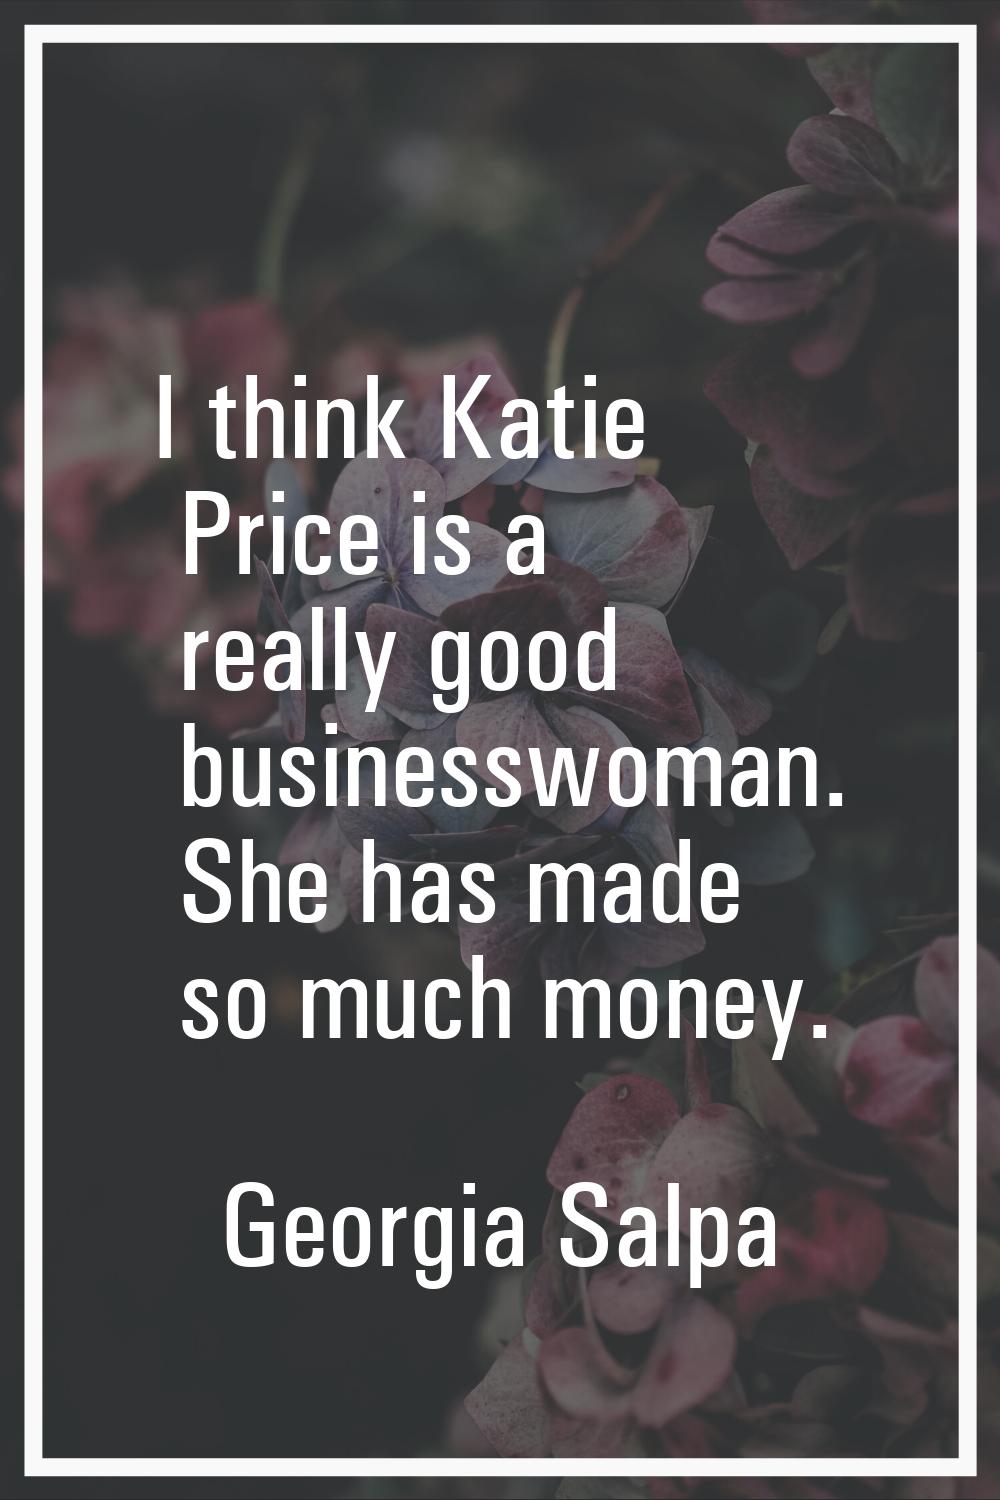 I think Katie Price is a really good businesswoman. She has made so much money.